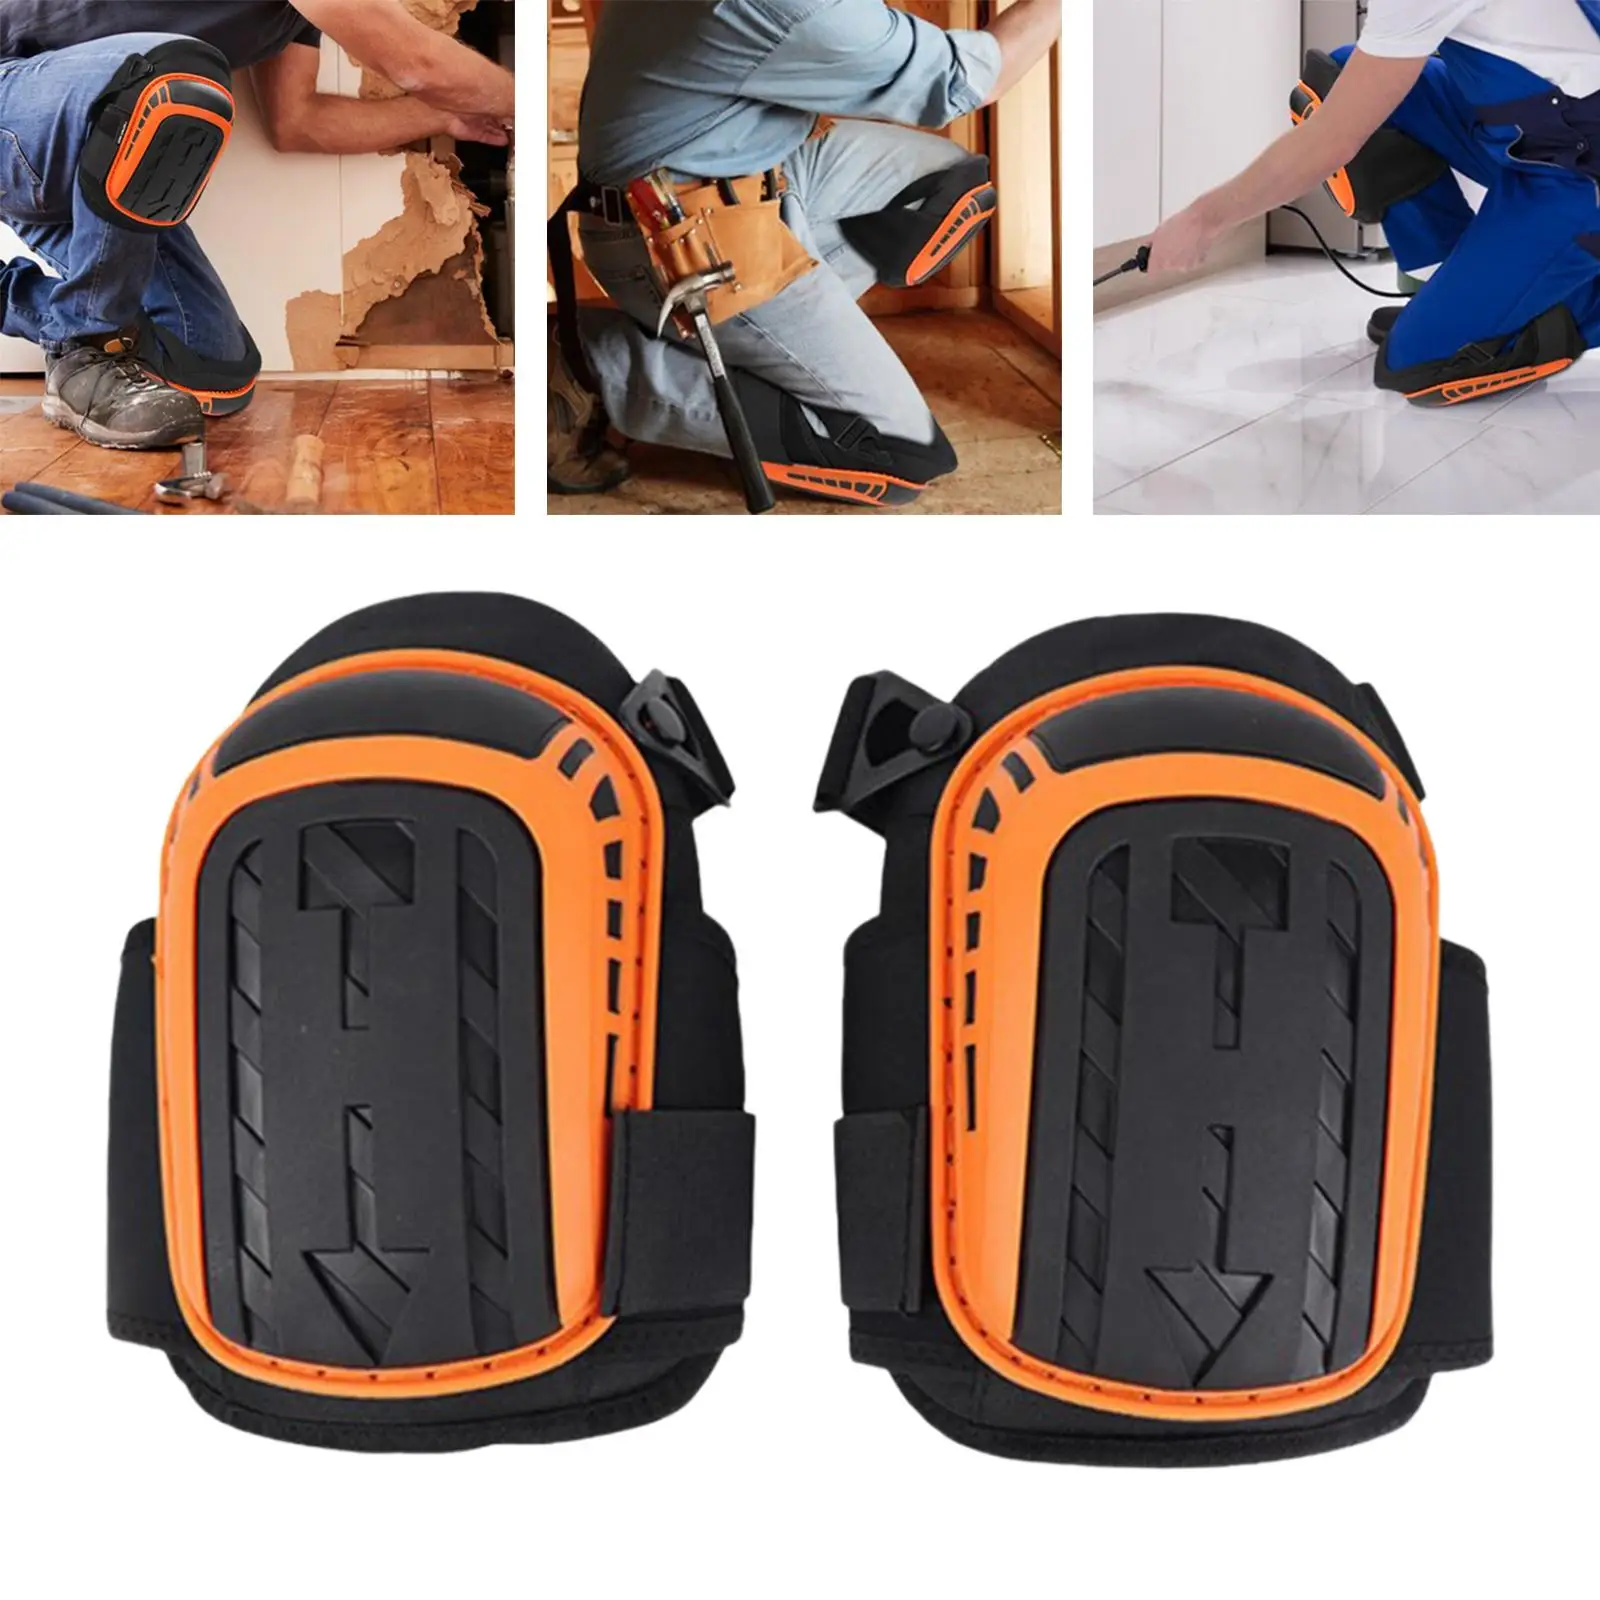 2 Pieces Professional Knee Pads with Heavy Duty Foam Padding and Comfortable,Strong Double Straps